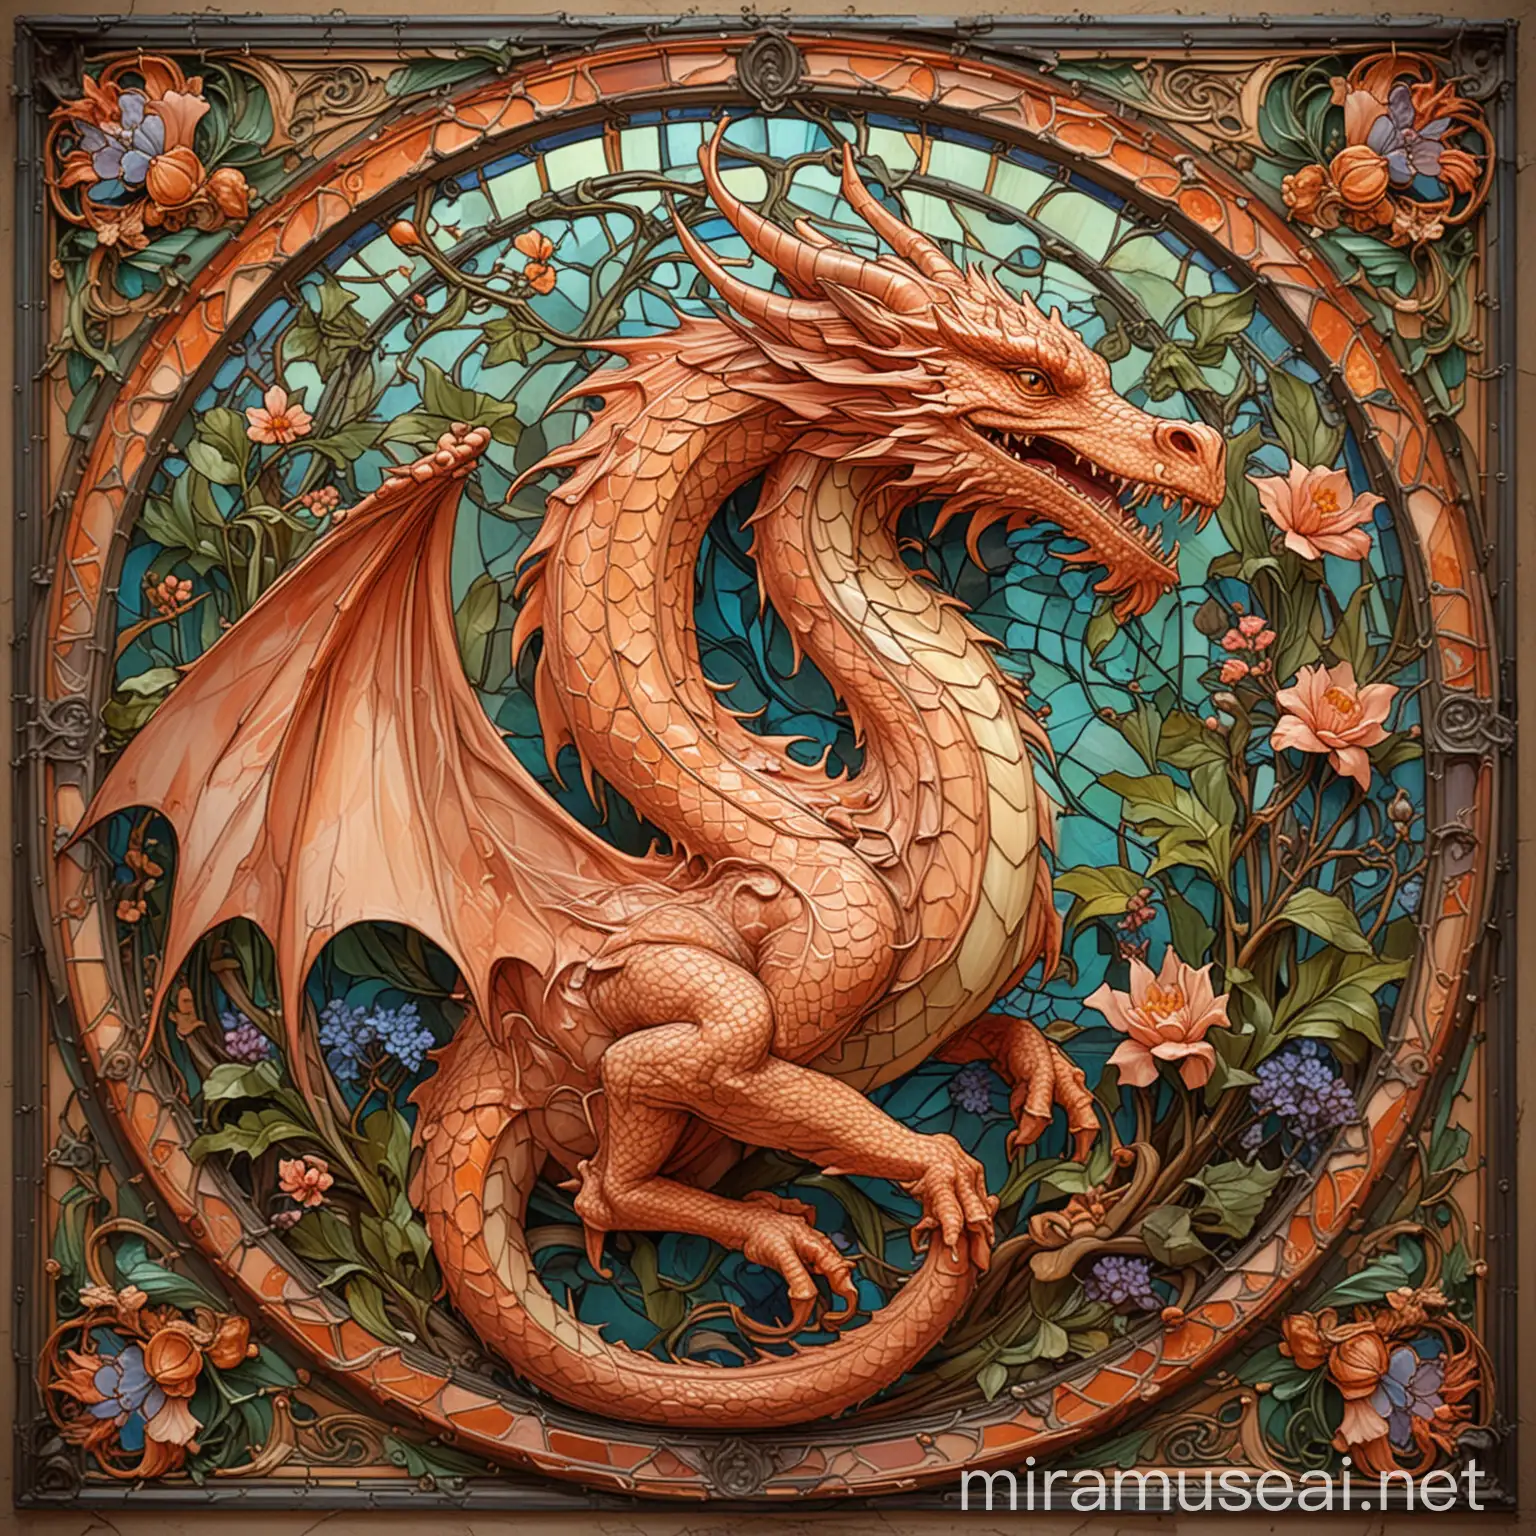  vintage oil painting, a dragon with Art Nouveau  style, bold and harmonious lines, with natural Art Nouveau curves, detailed floral and vine motifs merging with geometric shapes, with Art Nouveau inspired patterns, digital grid backgrounds intertwined with lush natural forms, neon-like outline effects evoking the beauty of stained glass, peach color background, high contrast crafted for visual clarity and spaces of artistic expression